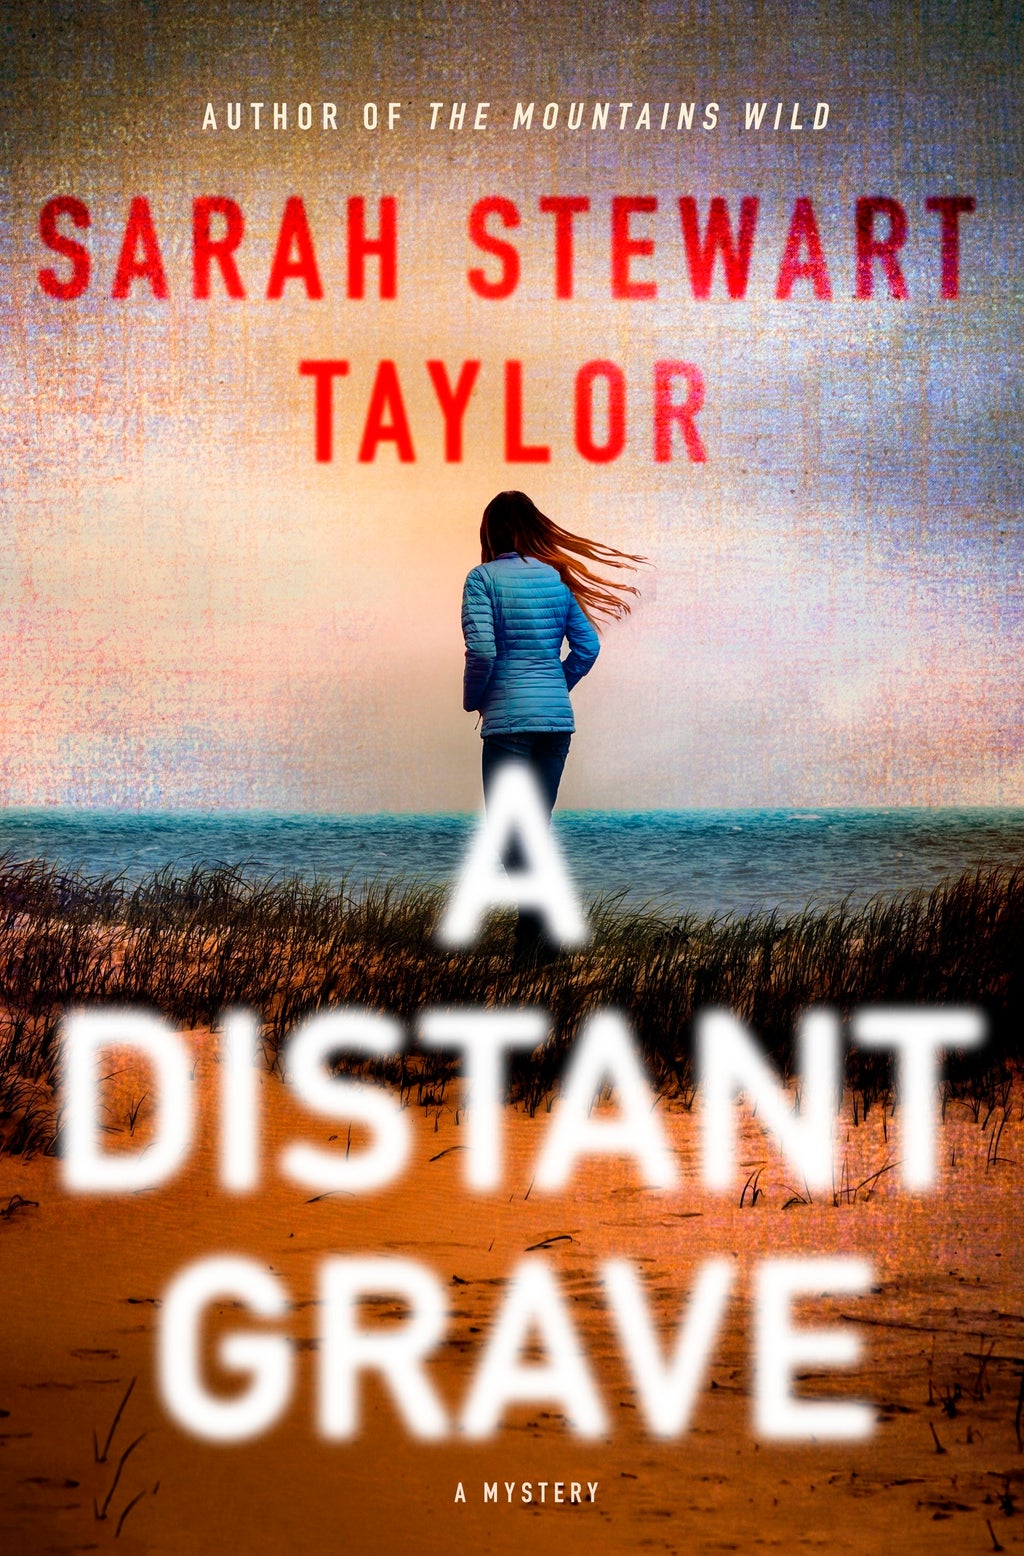 Review: 'A Distant Grave' is a complex and lyrical thriller